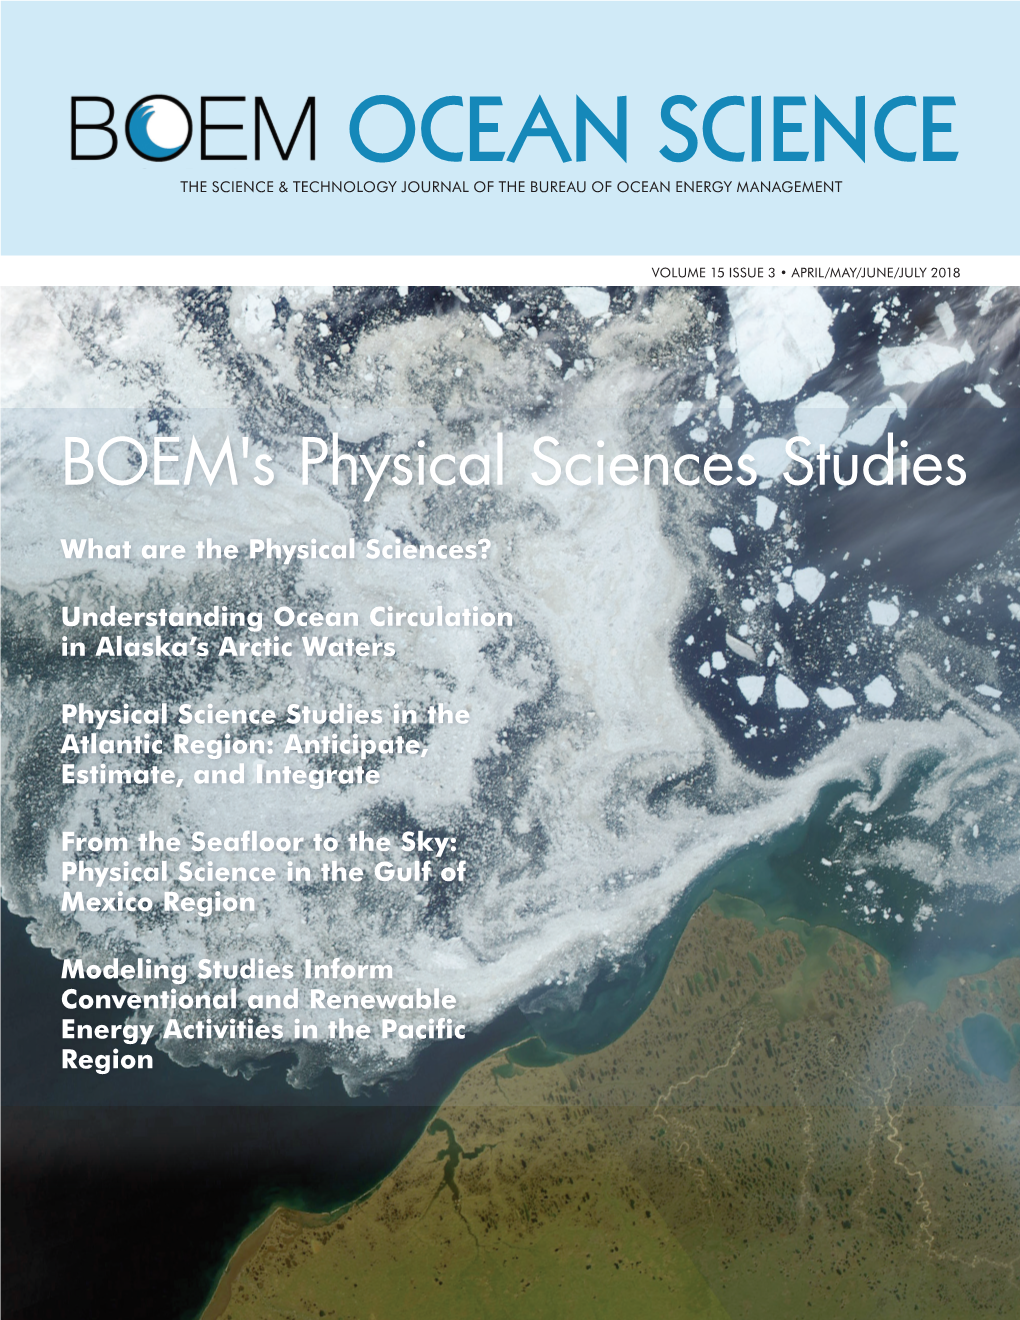 BOEM OCEAN SCIENCE Is What Are the Physical Sciences?